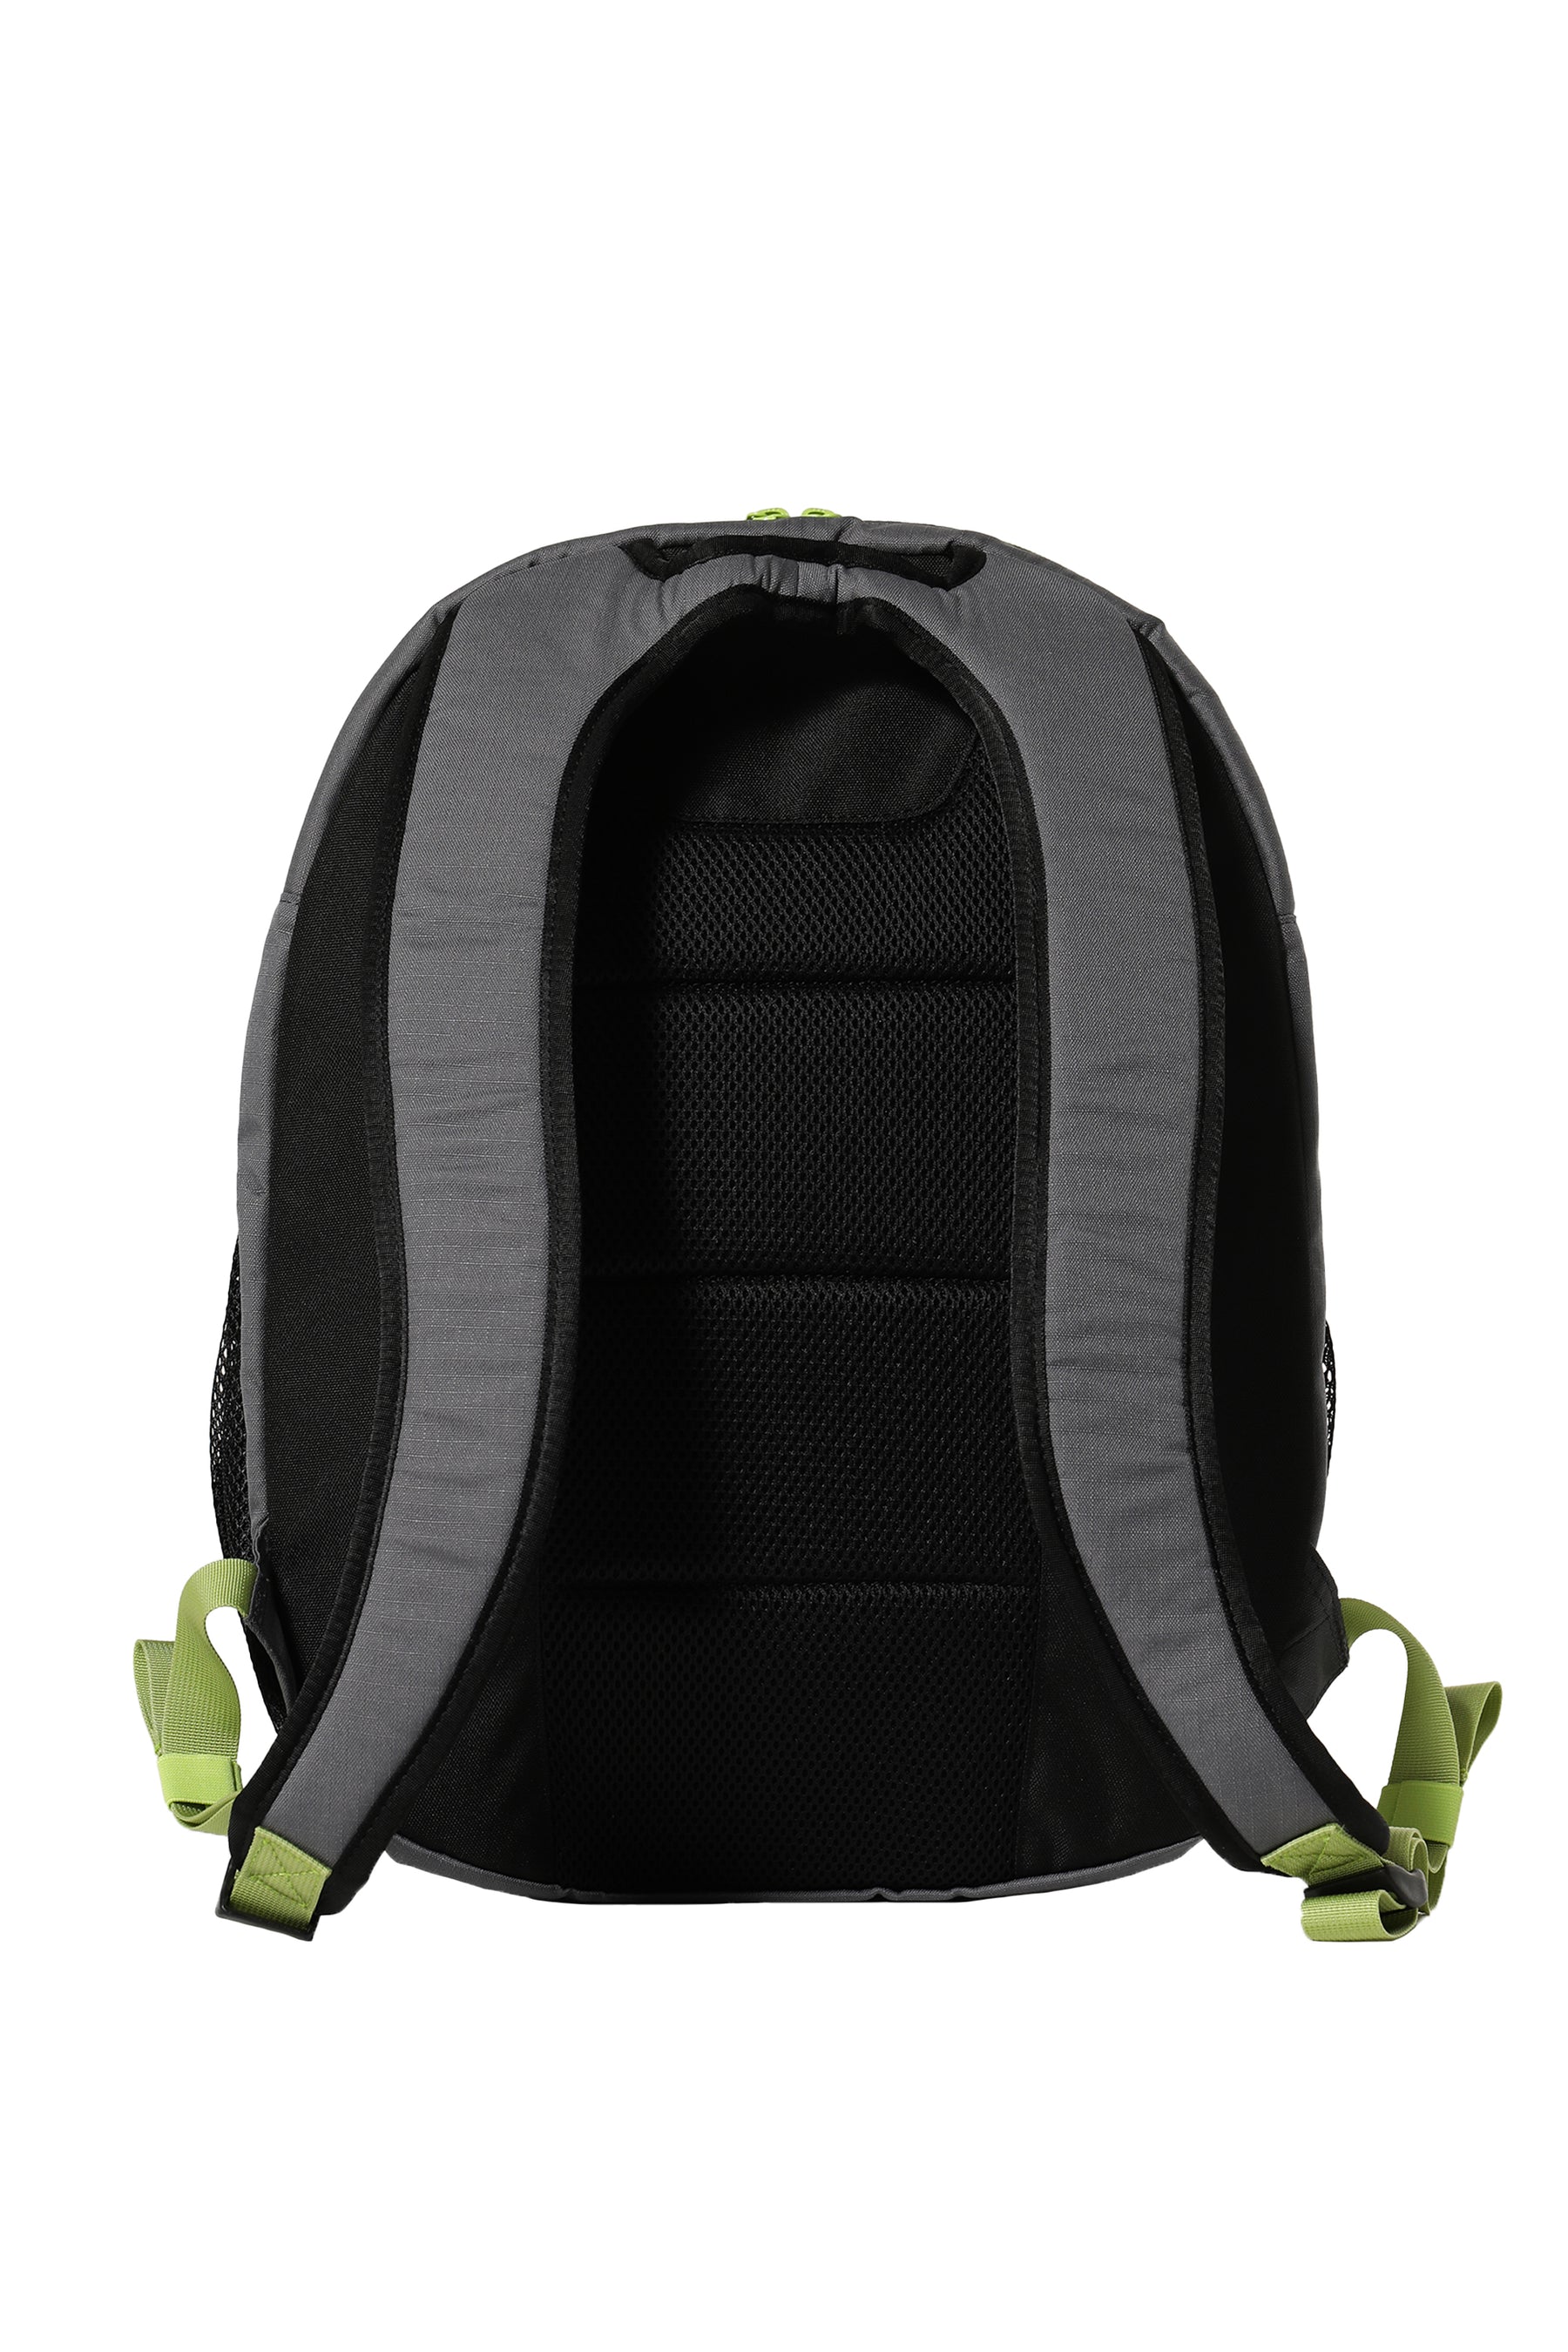 SPORT BACK PACK / GRY